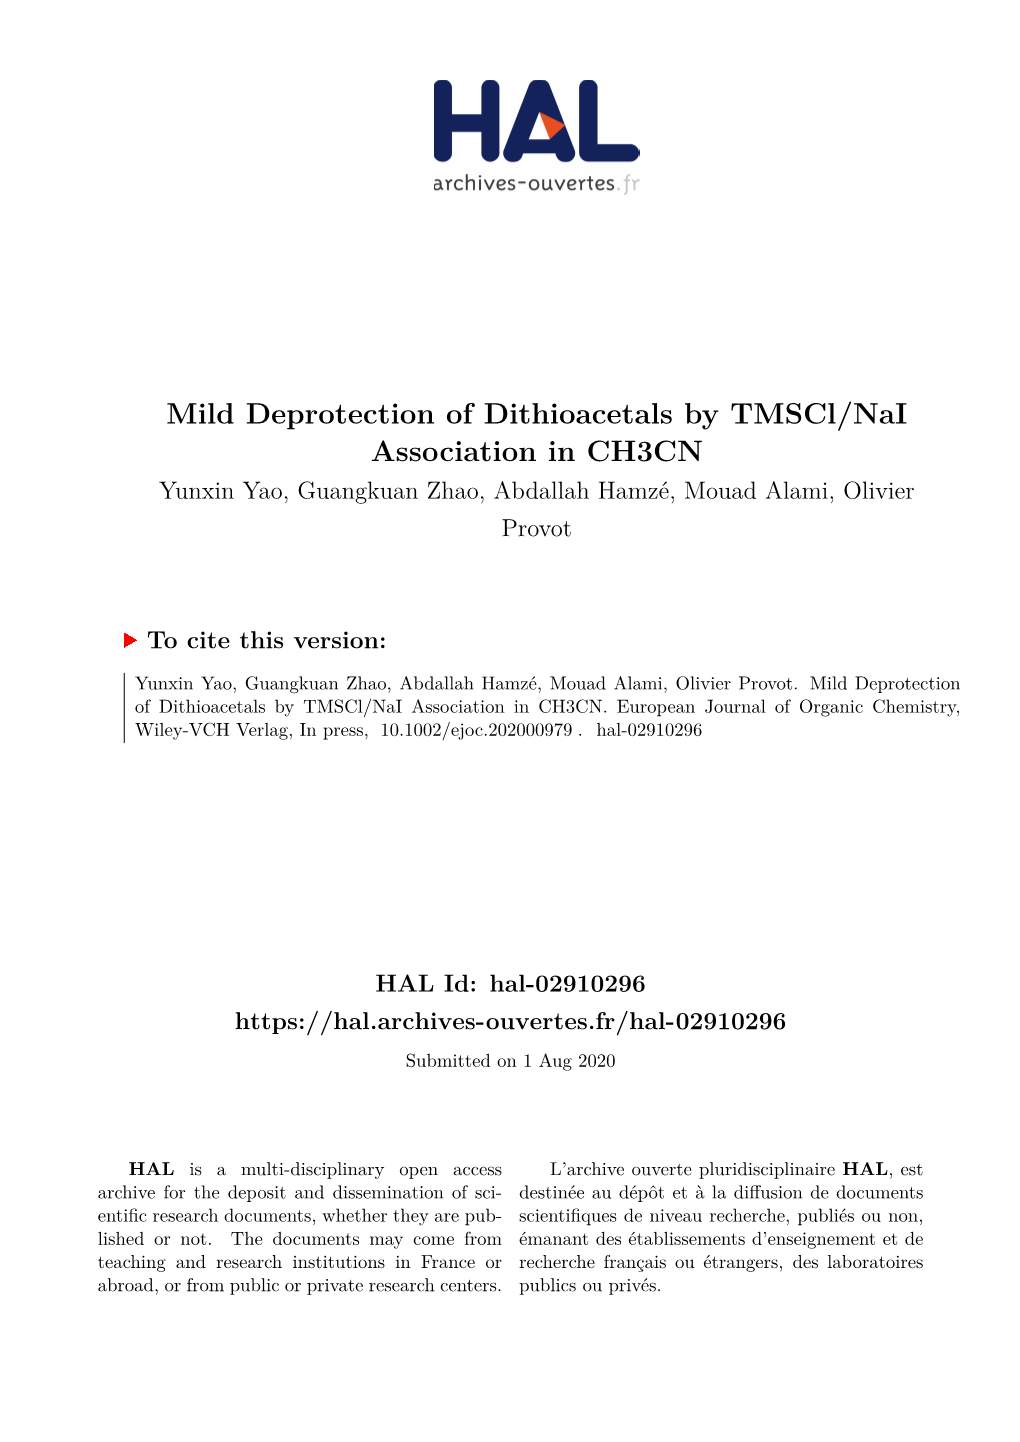 Mild Deprotection of Dithioacetals by Tmscl/Nai Association in CH3CN Yunxin Yao, Guangkuan Zhao, Abdallah Hamzé, Mouad Alami, Olivier Provot